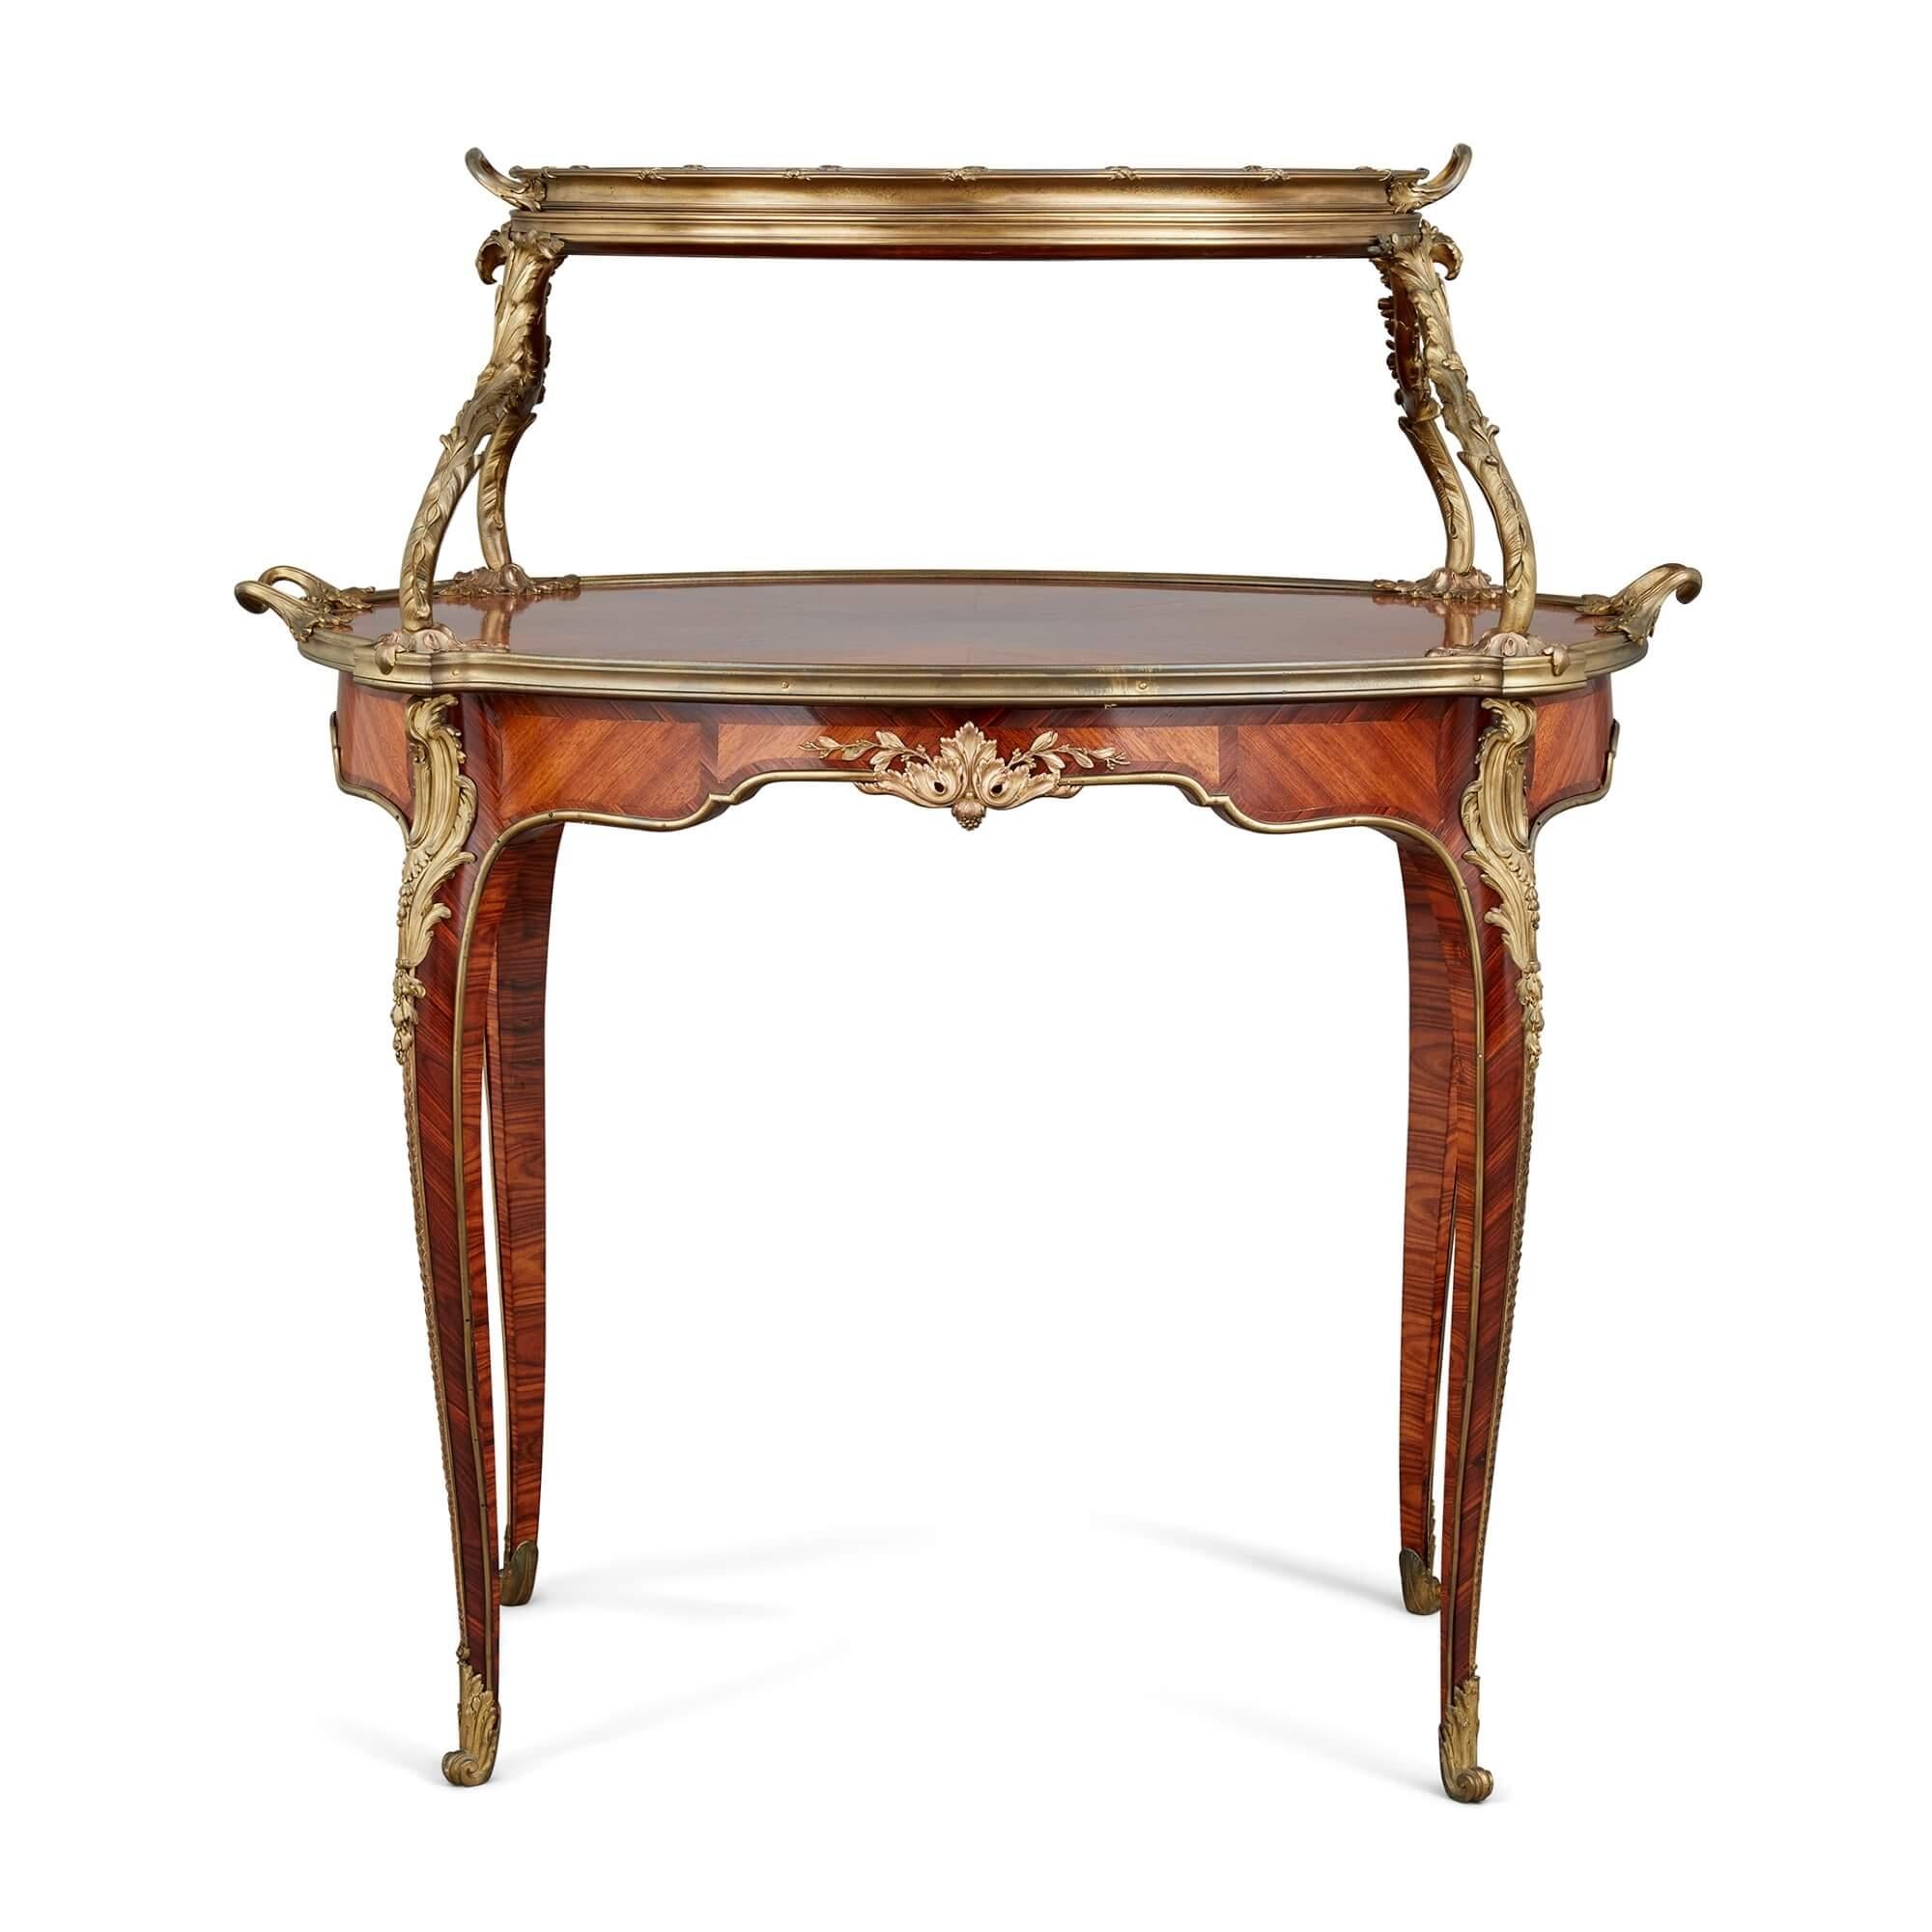 Antique ormolu mounted tea table attributed to Paul Sormani 
French, Late 19th Century 
Height 94cm, width 88cm, depth 55cm 

Traditionally used for the display and serving of tea and owned by the elite, the tea table in Mayfair Gallery’s collection